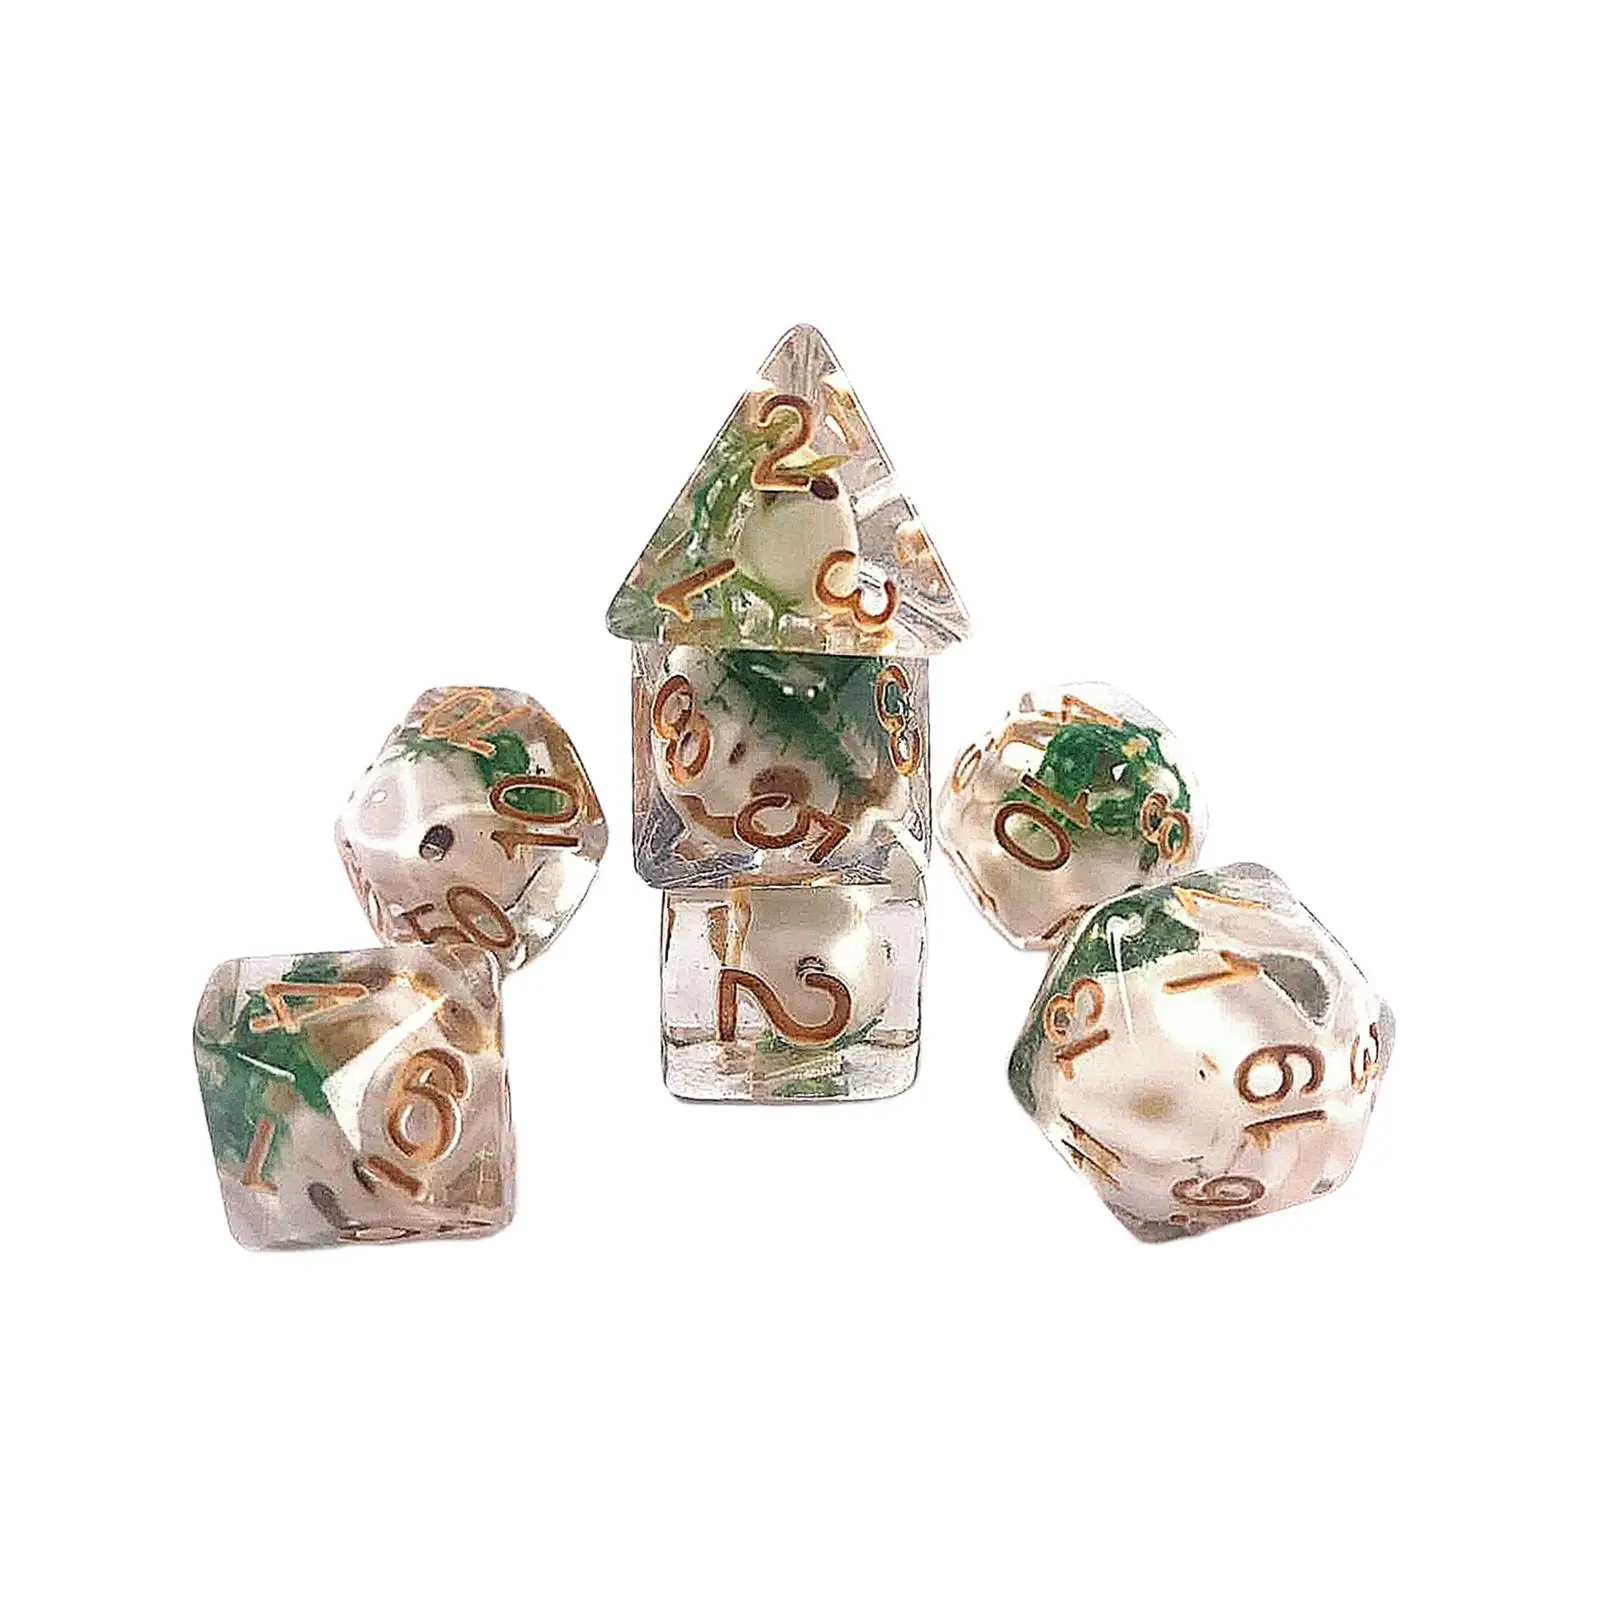 7x Dices Set Collection D6 D4 D8 D10 D12 D20 Table Board Roll Playing Games Props for Cafe Party RPG Tabletop Game